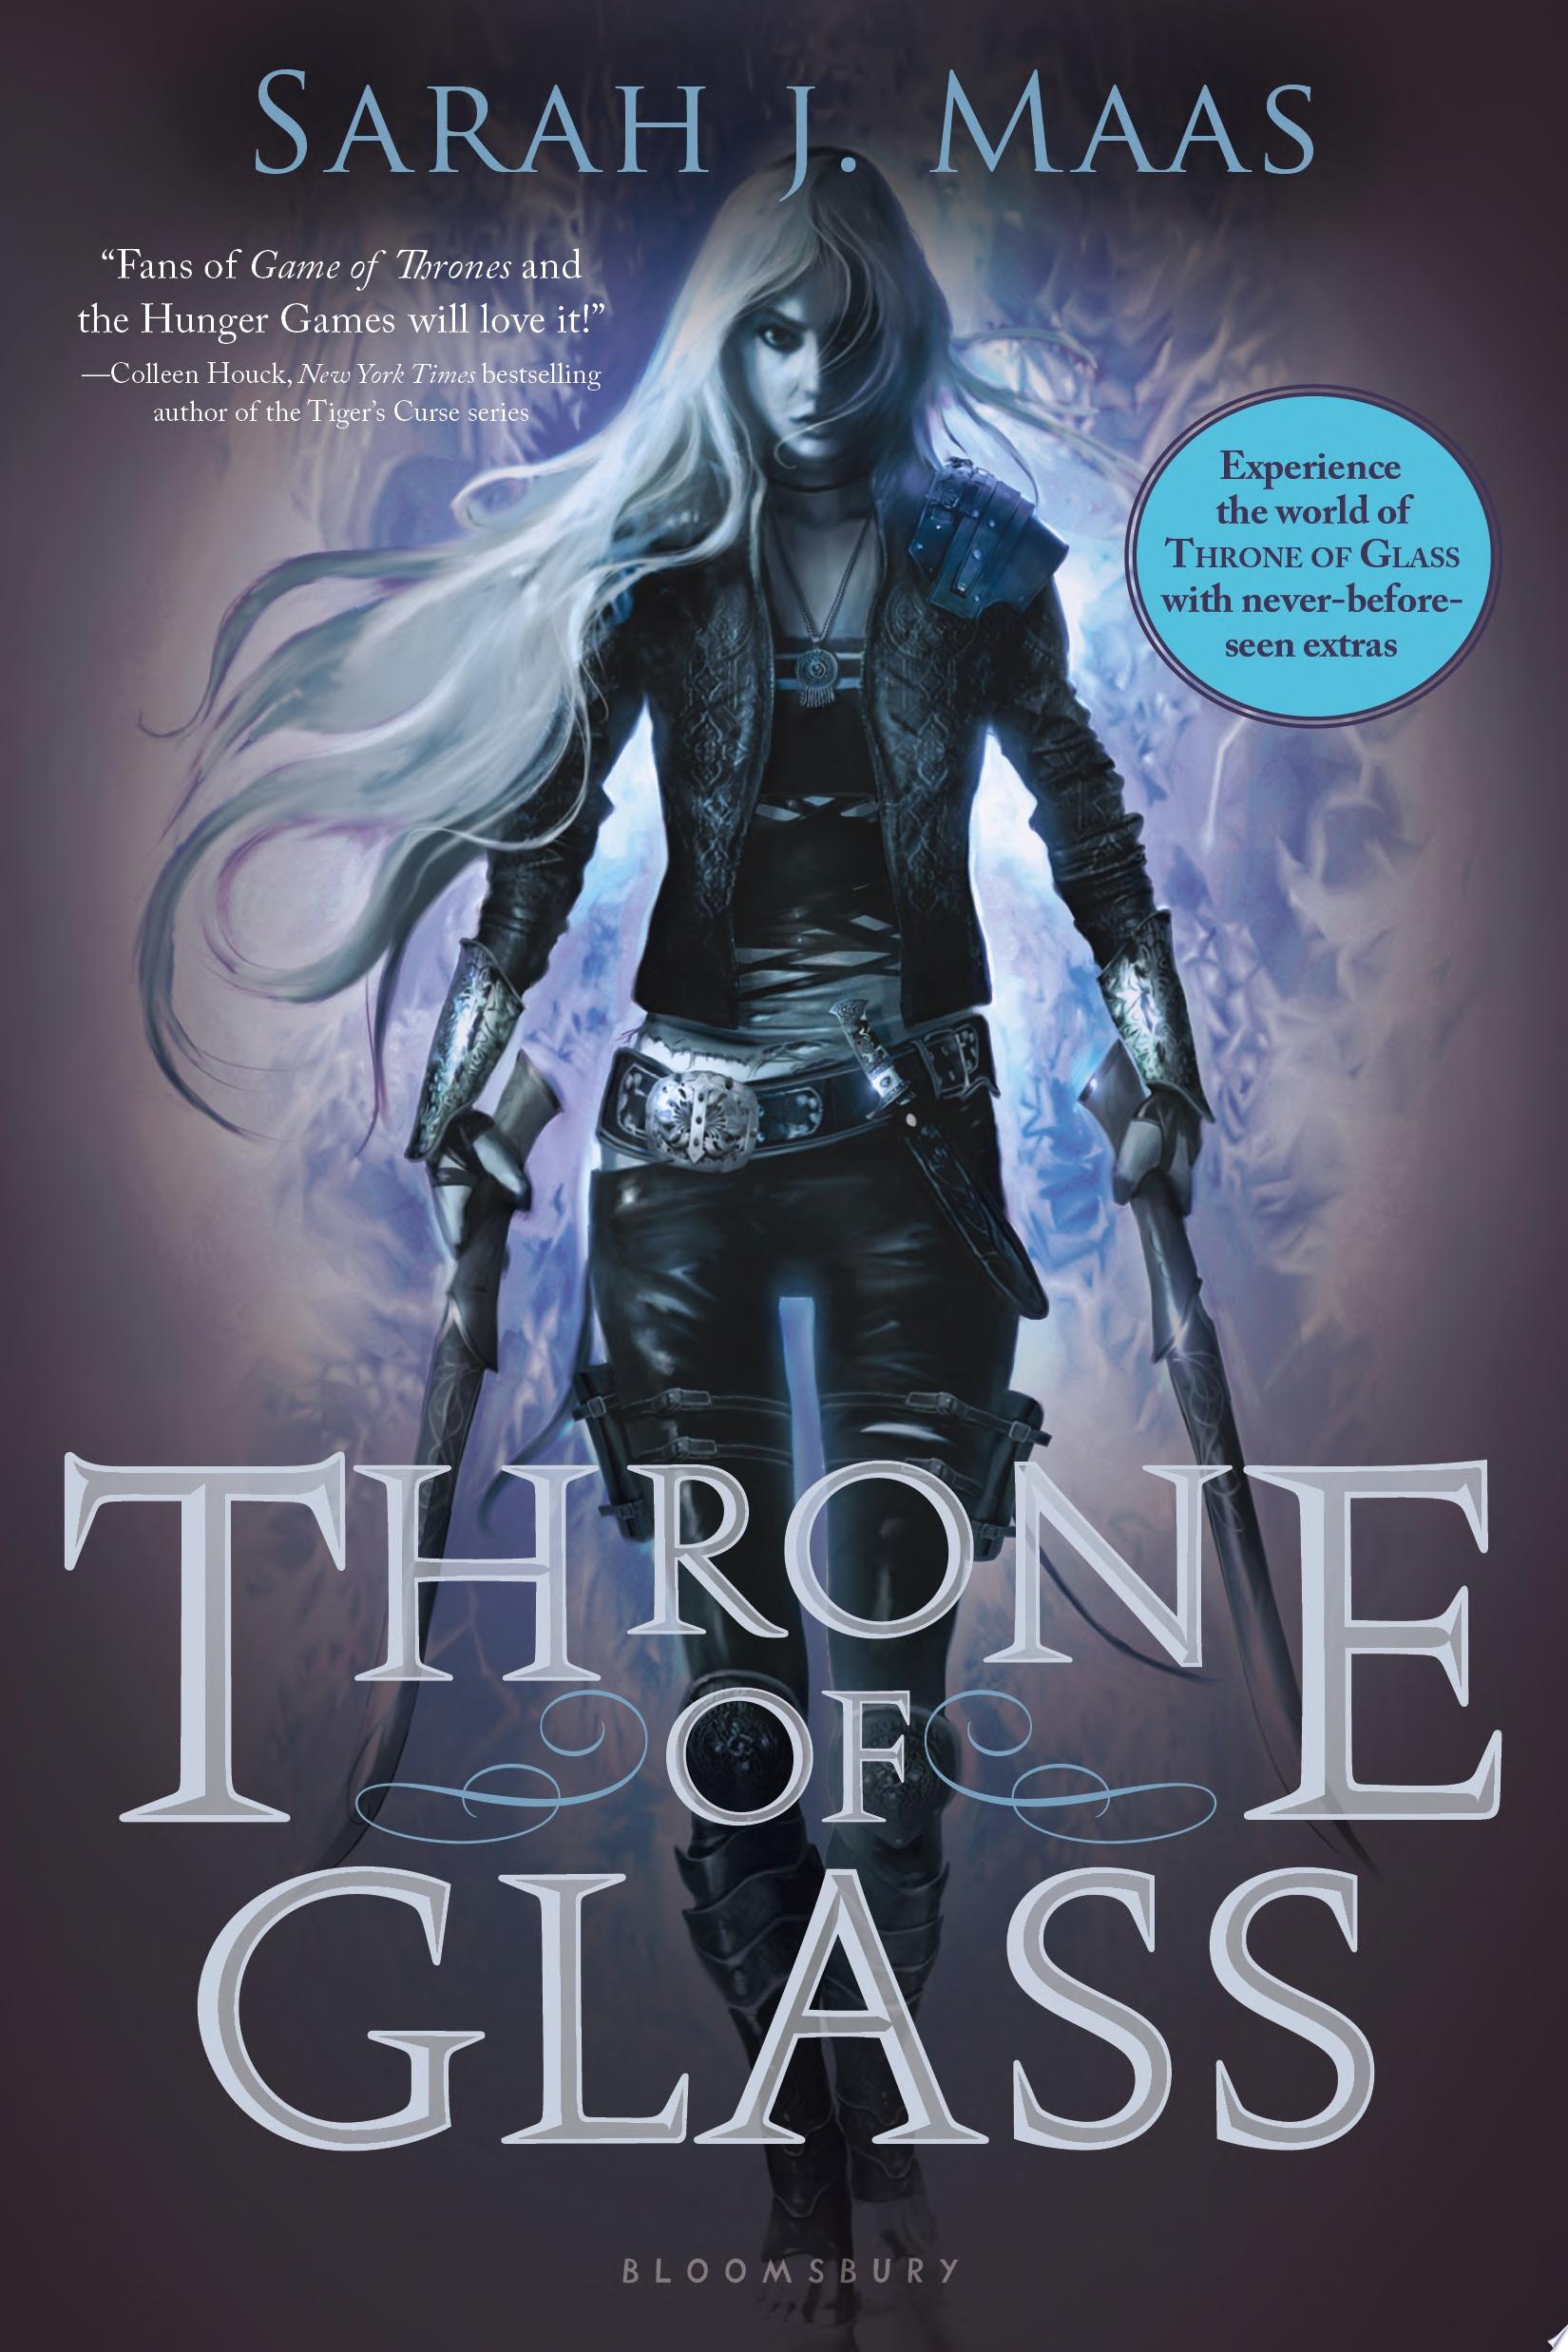 Image for "Throne of Glass"